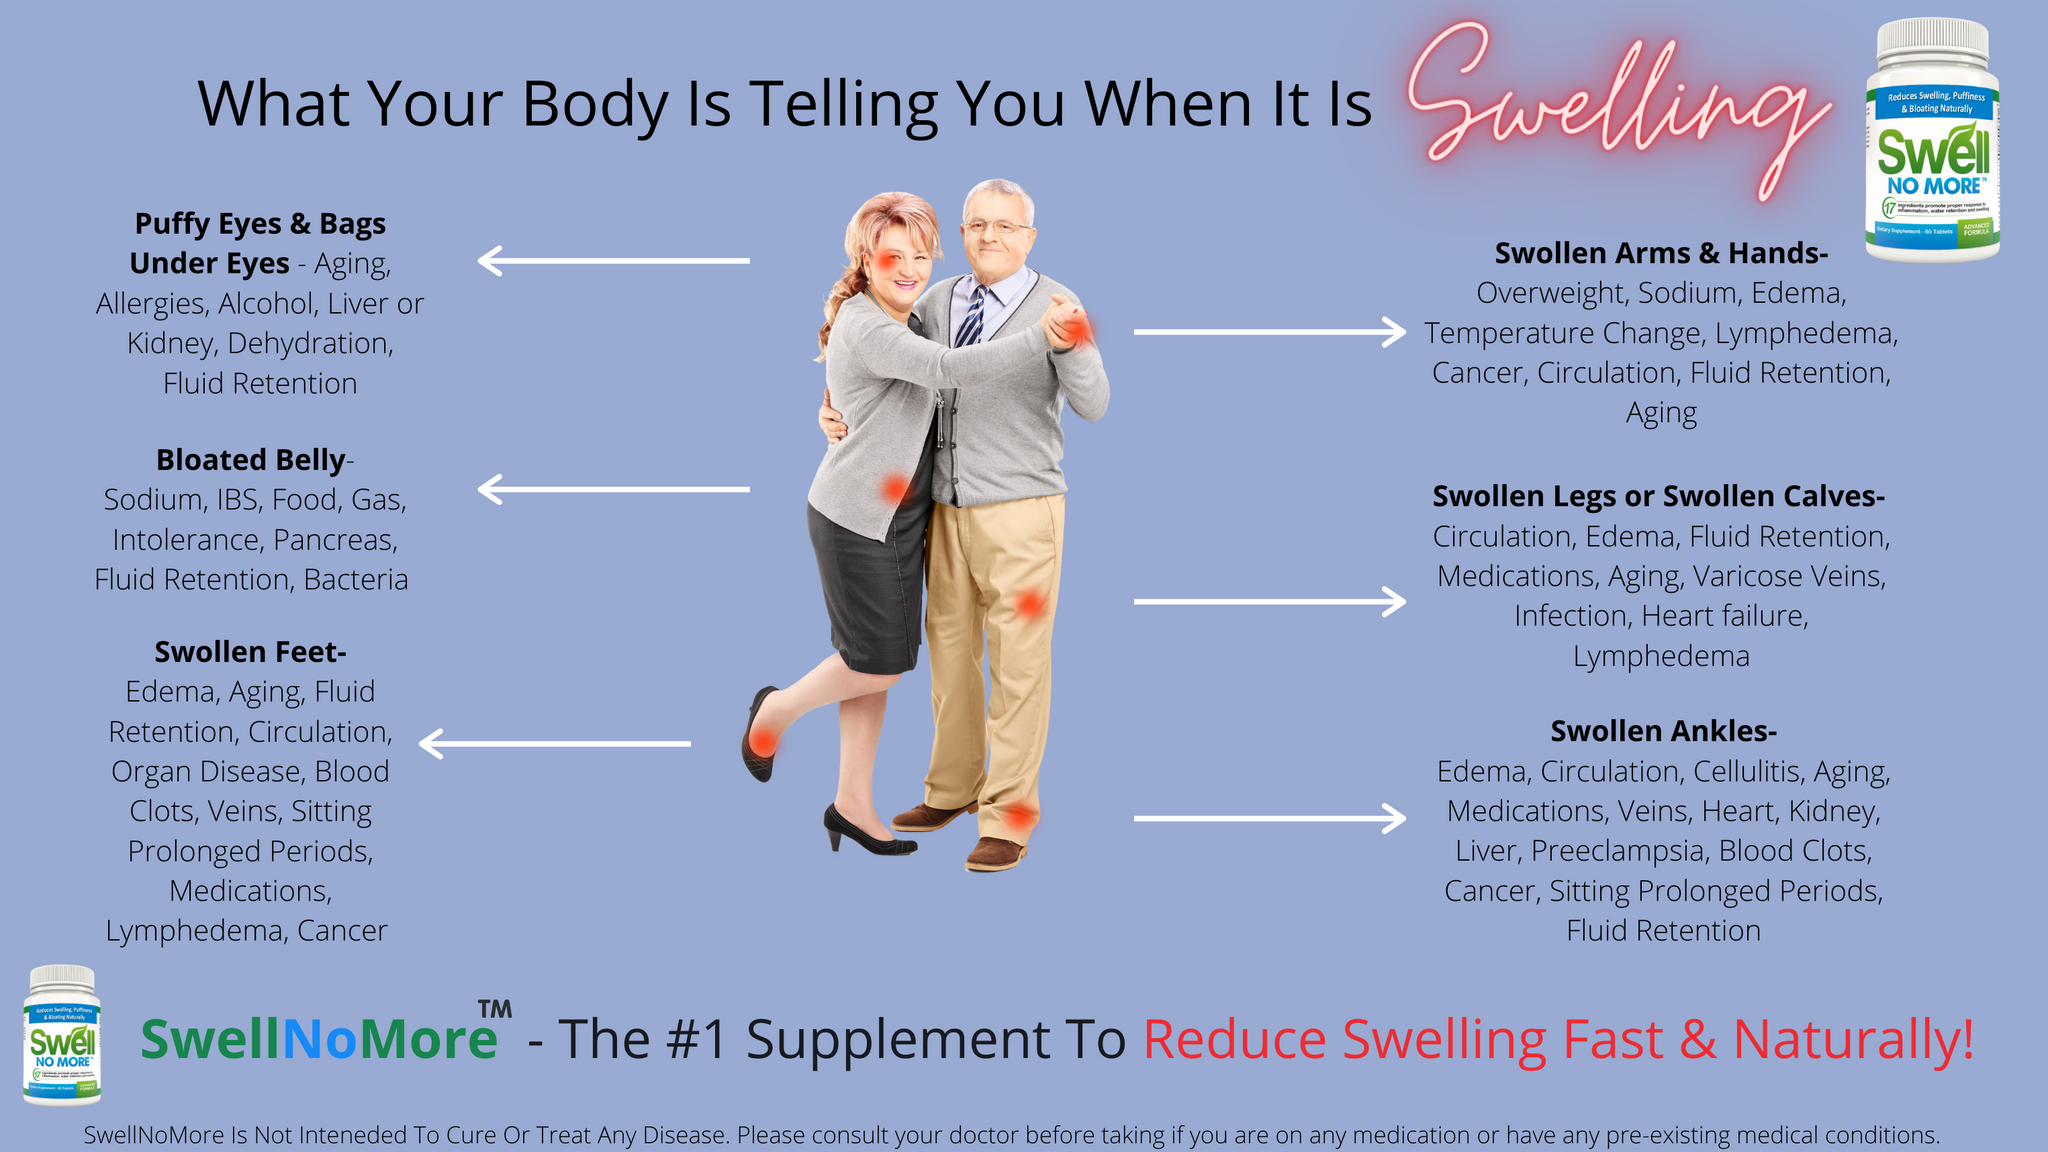 What Your Body Is Telling You When It Is Swelling